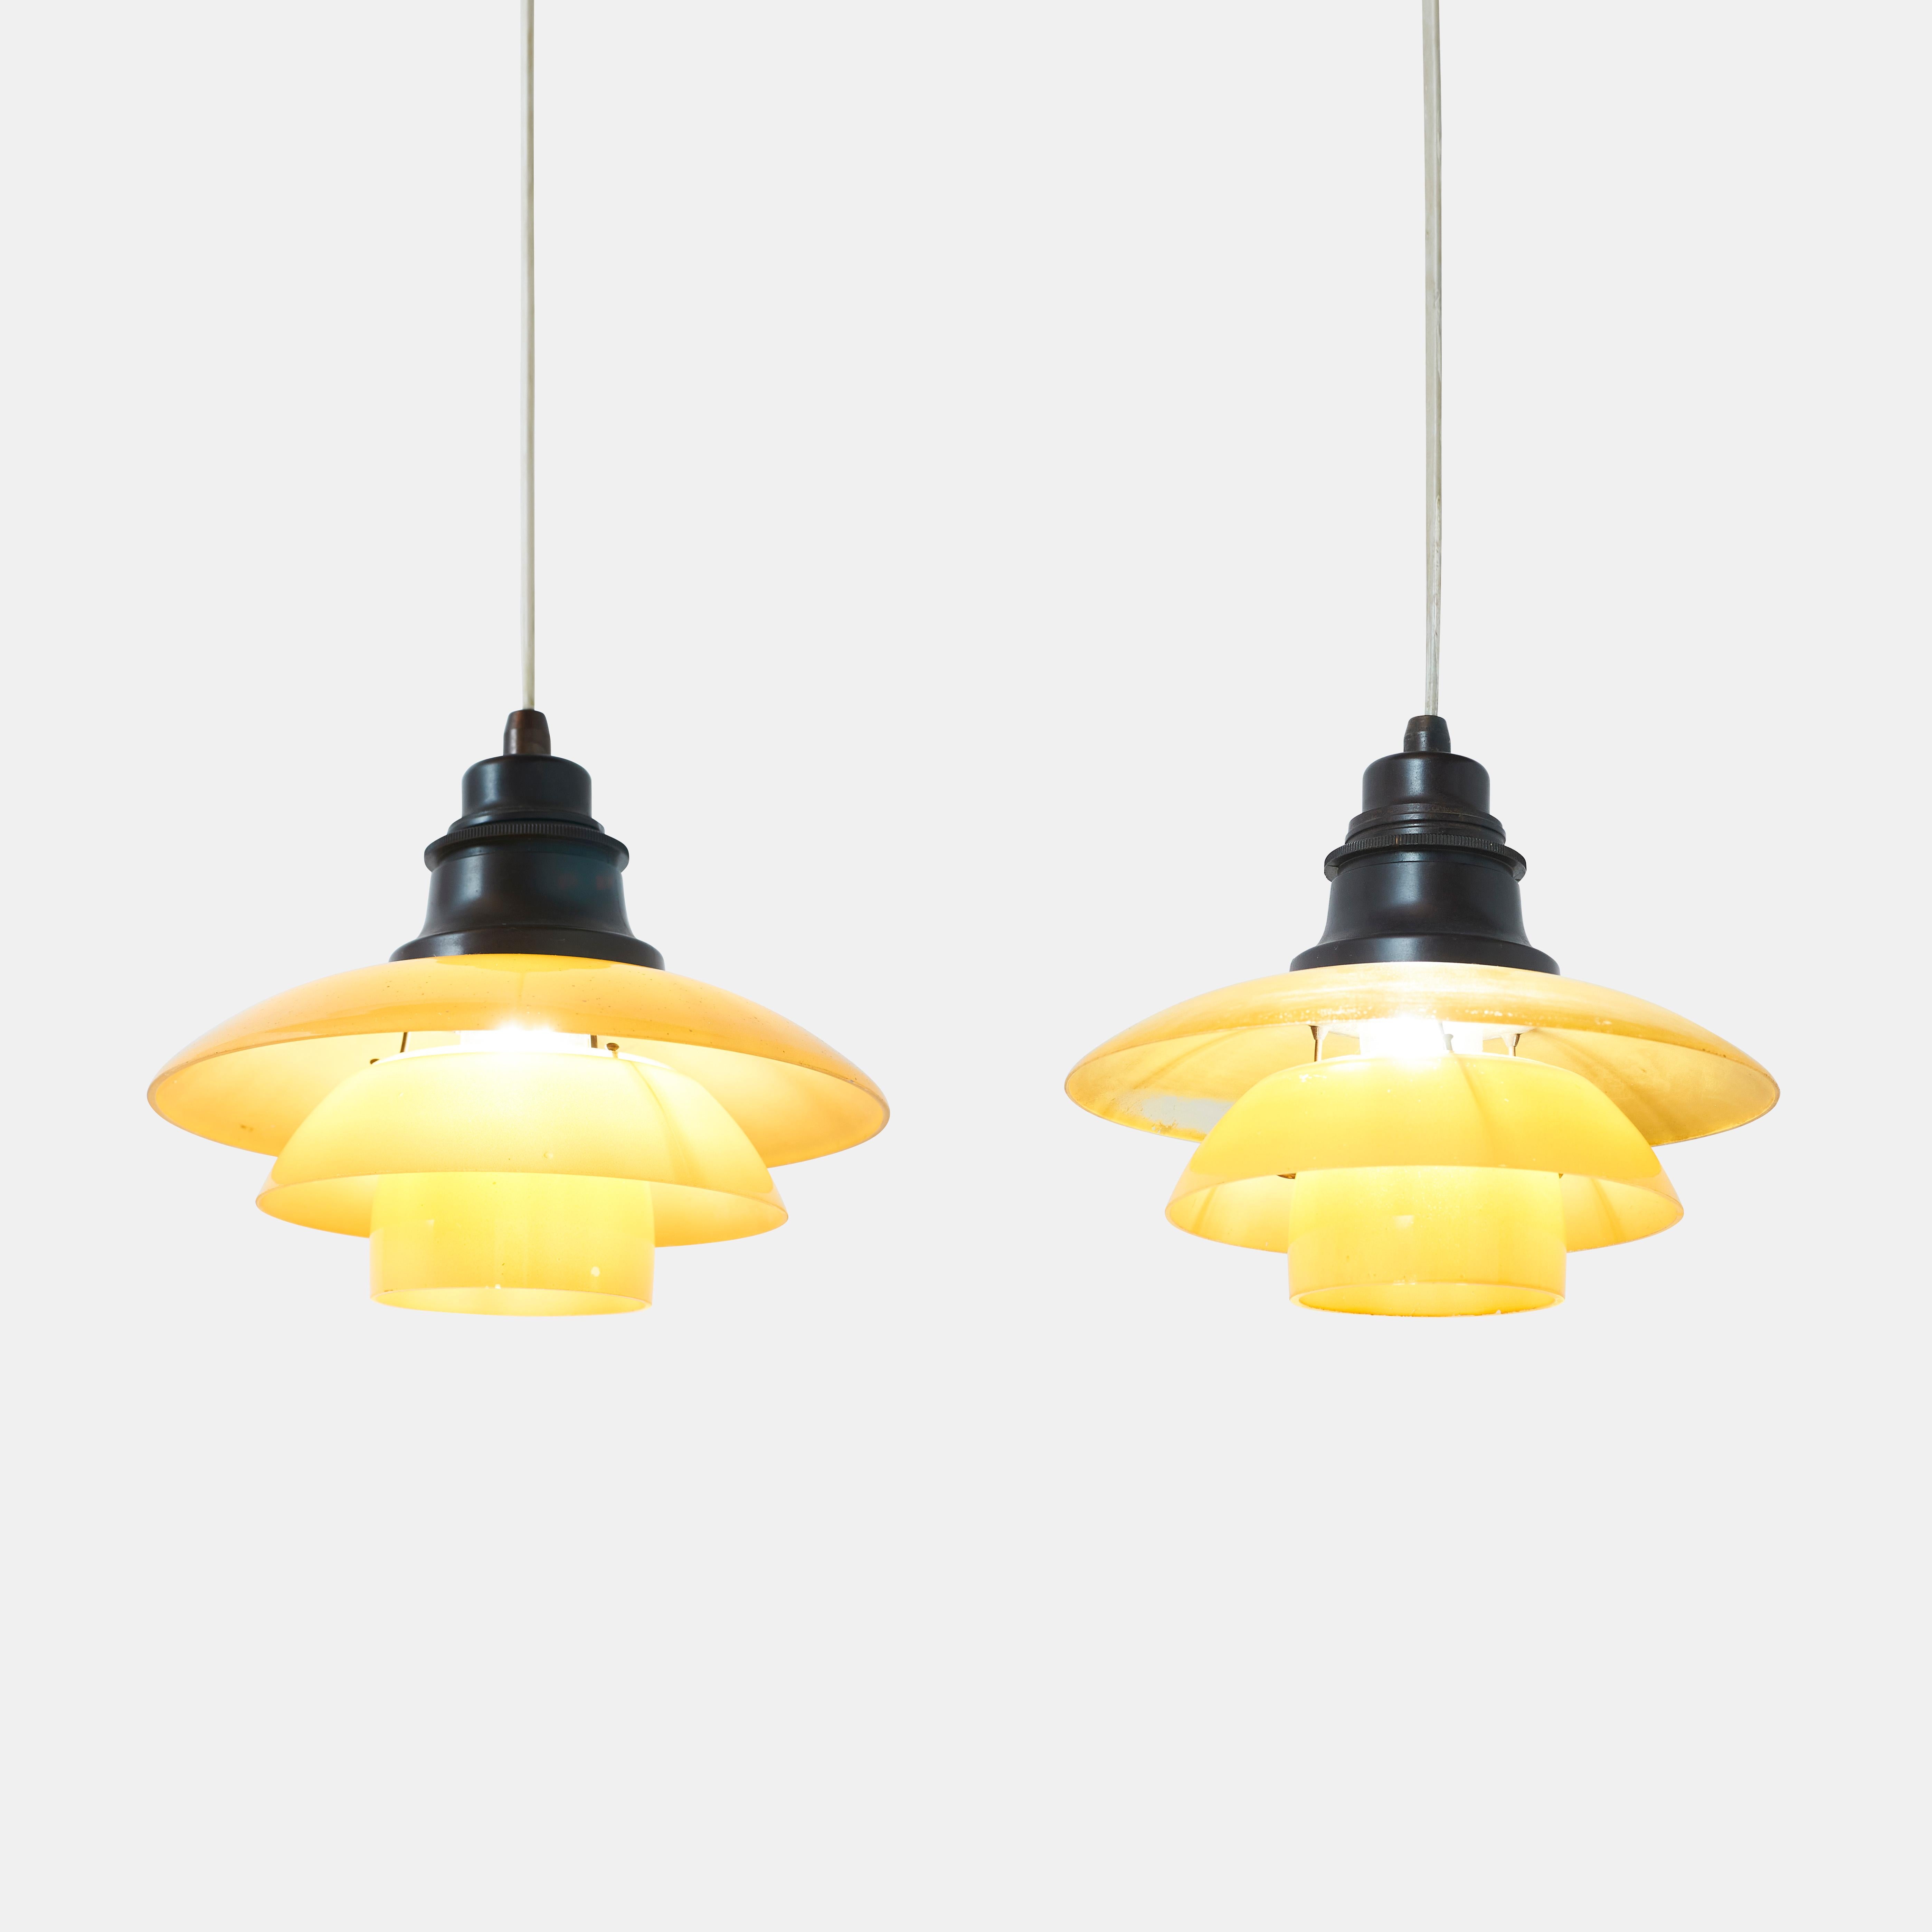 Pair of Yellow PH 2/2 pendents by Poul Henningsen
A pair of PH 2/2 pendant lamps for Louis Poulsen. Brown bakelite fixtures with yellow frosted glass shades.

There are some abrasions to the yellow frosted glass on both examples. 
No chips on